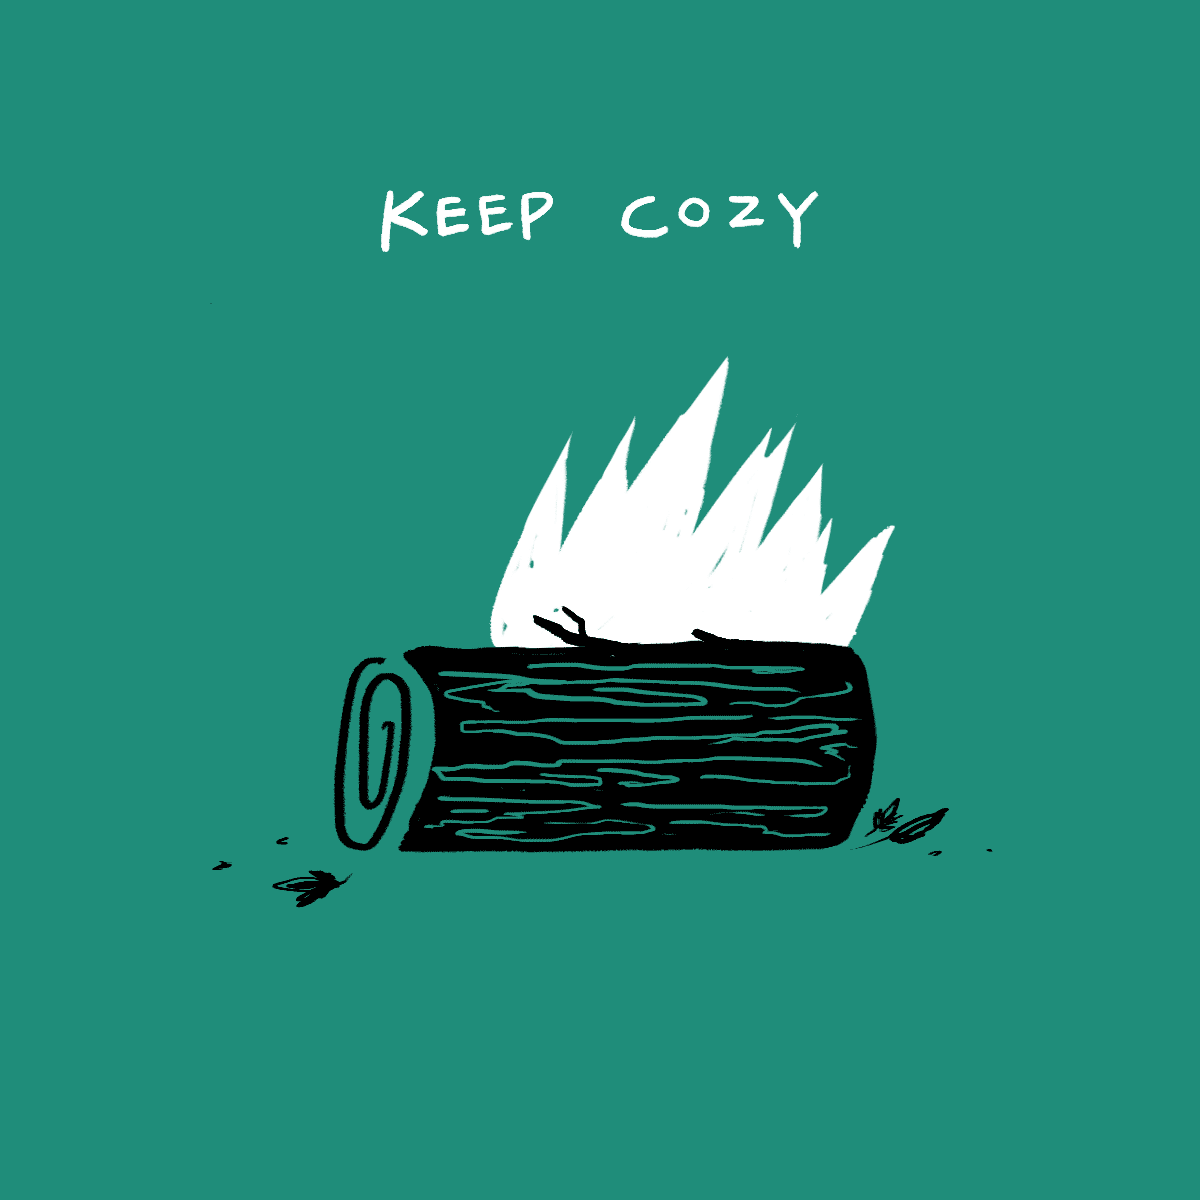 Keep cozy, friends” frame-by-frame animation by first-year student Tiffany  Zhong (IDEA Grad 2024) — IDEA School of Design Blog | Capilano University  Illustration and Design School